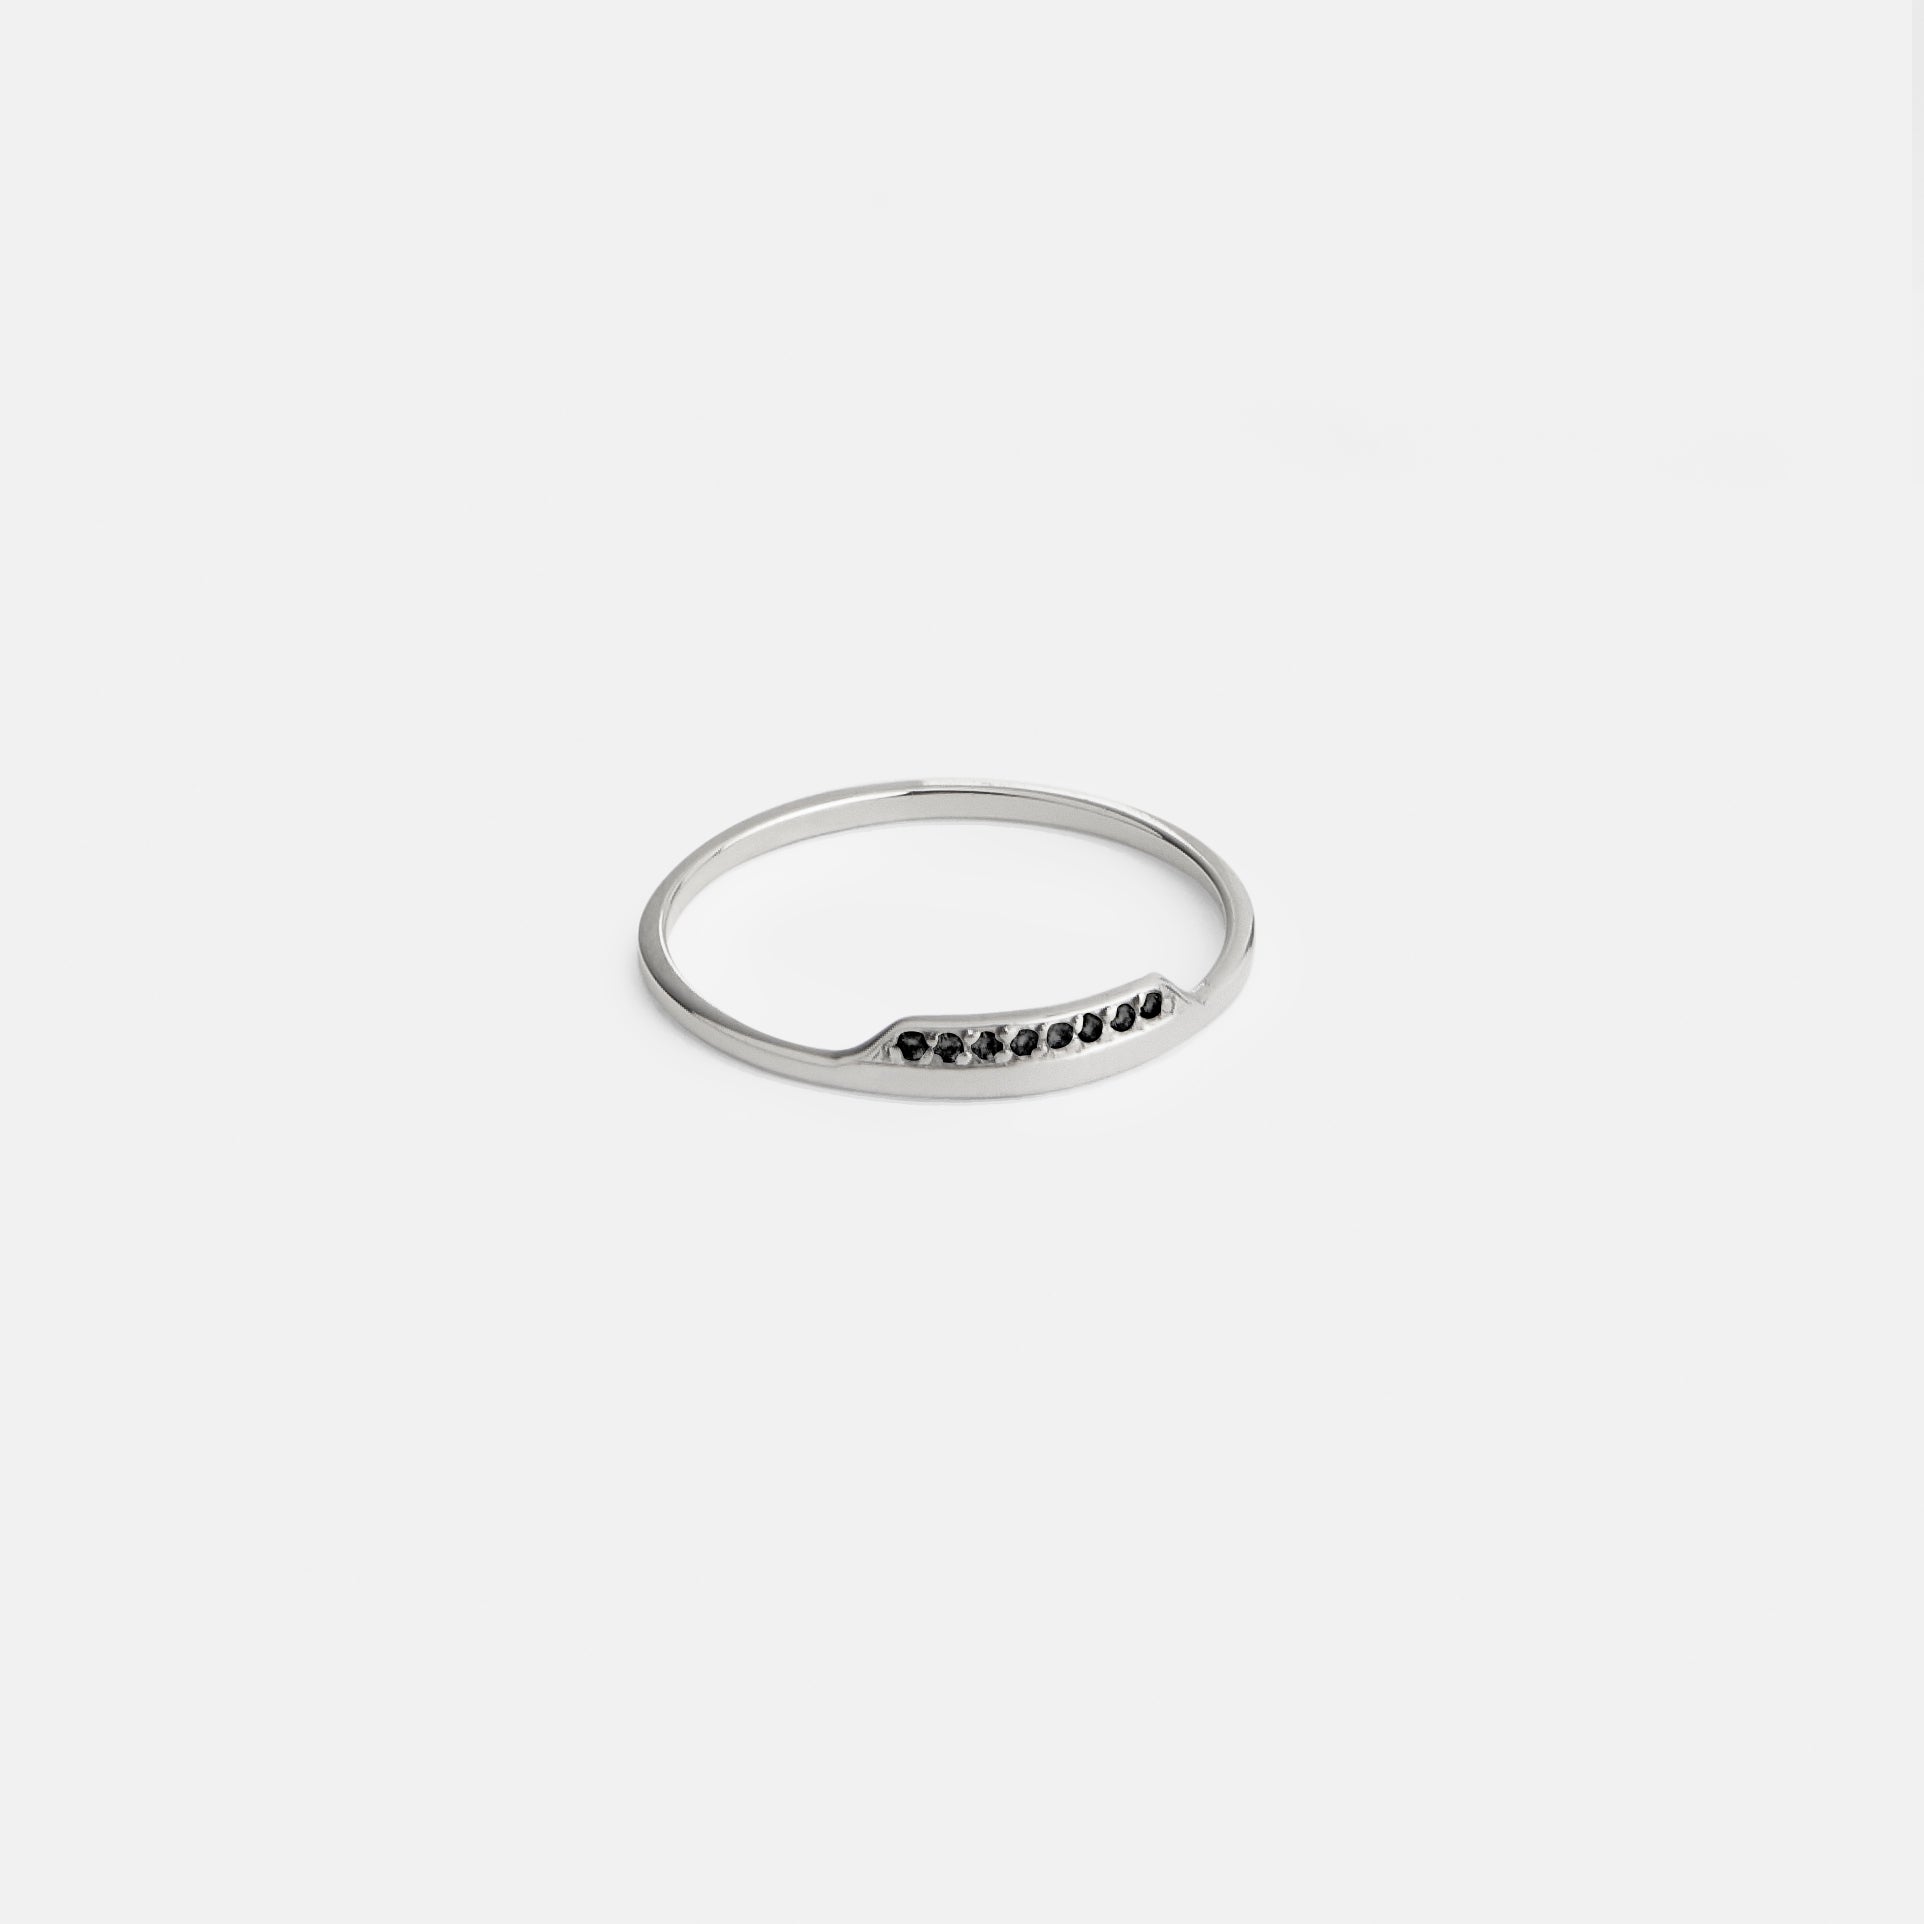 Salo Thin Ring in 14k White Gold set with Black Diamonds By SHW Fine Jewelry NYC